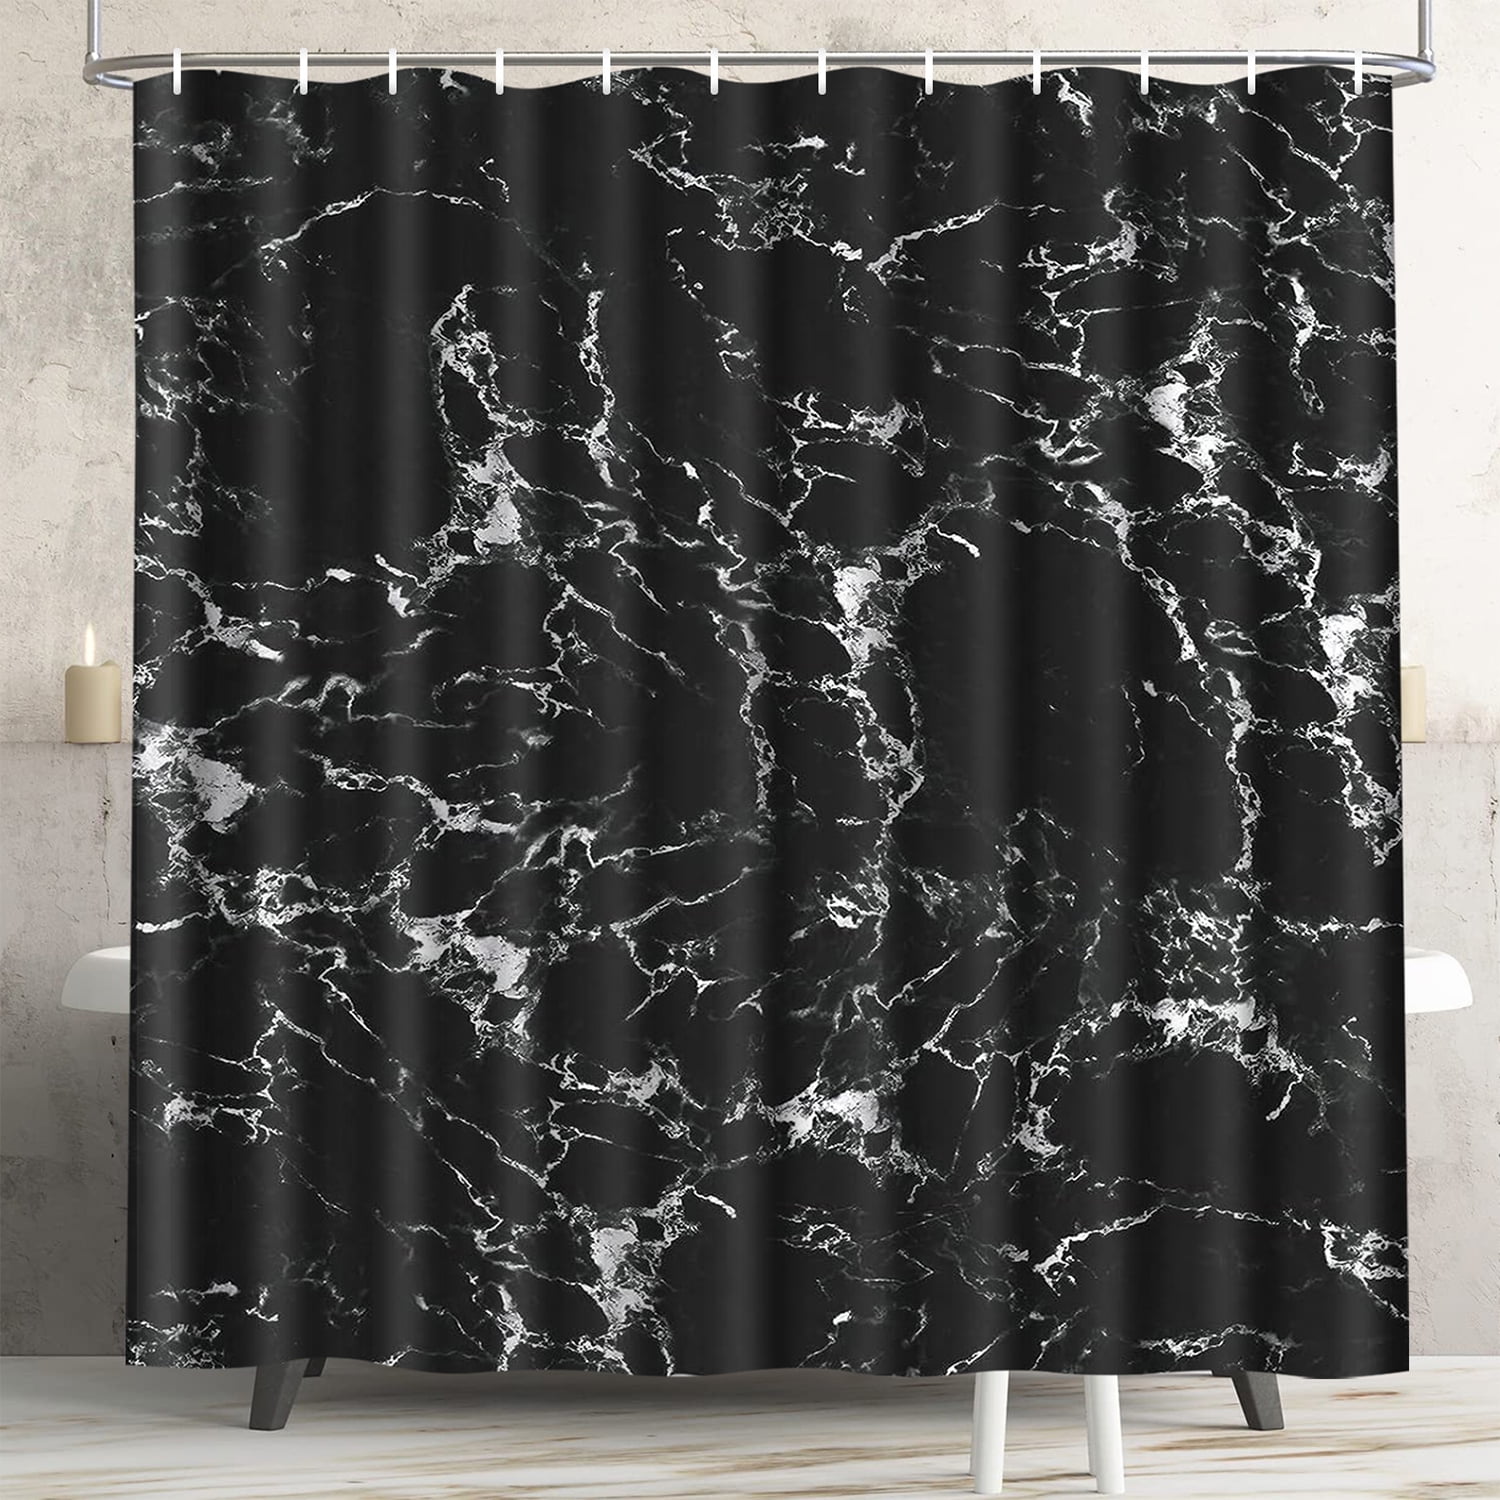 Lavsils 4Pcs Black Marble Shower Curtain Set, Bathroom Set with Shower  Curtain and Rugs and Accessor…See more Lavsils 4Pcs Black Marble Shower  Curtain